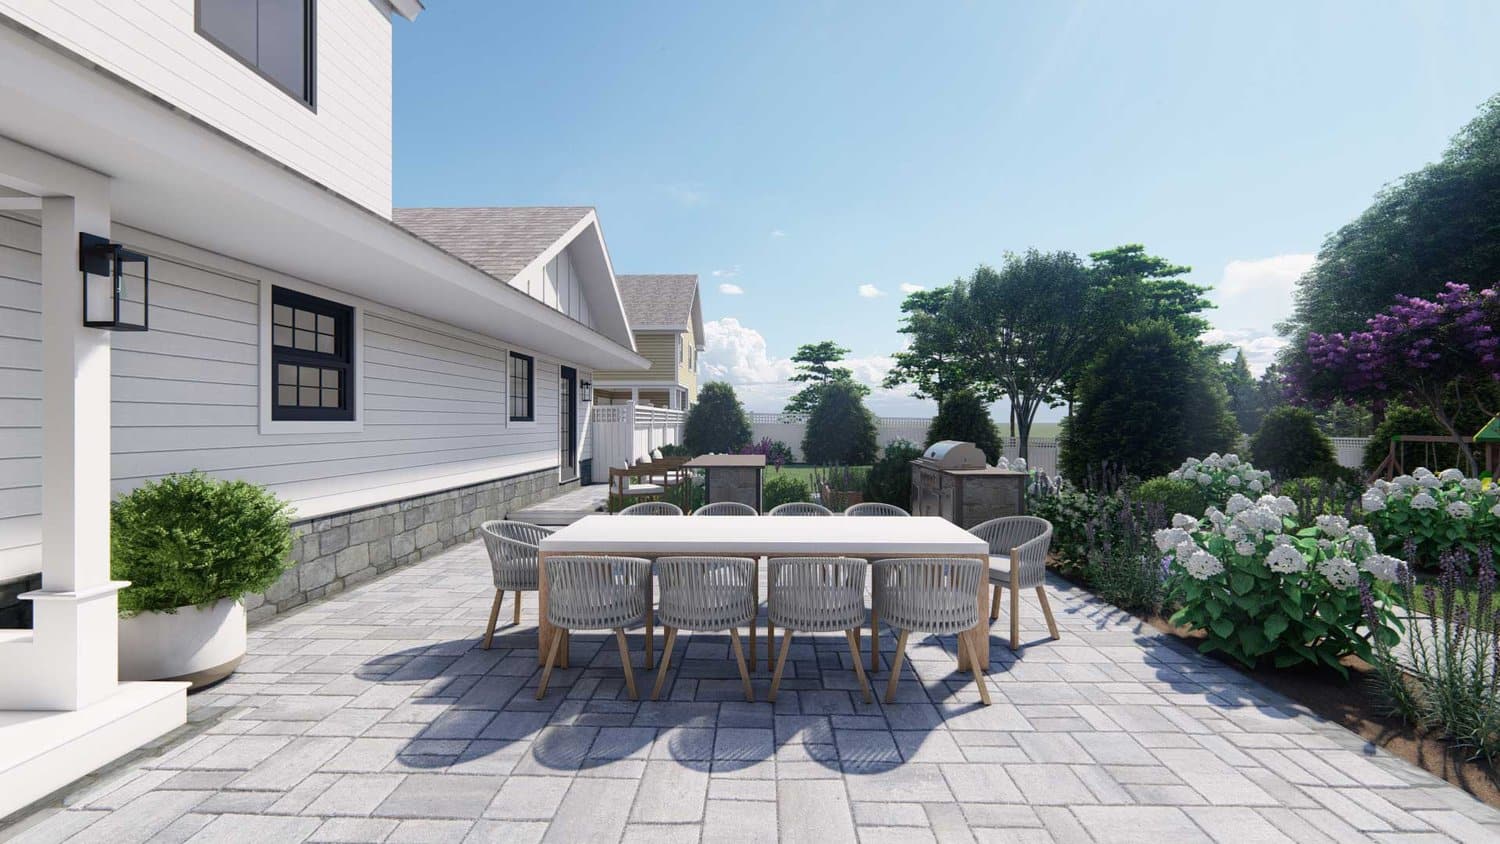 Long Island concrete paver front yard with dining area, outdoor kitchen, flowers and trees